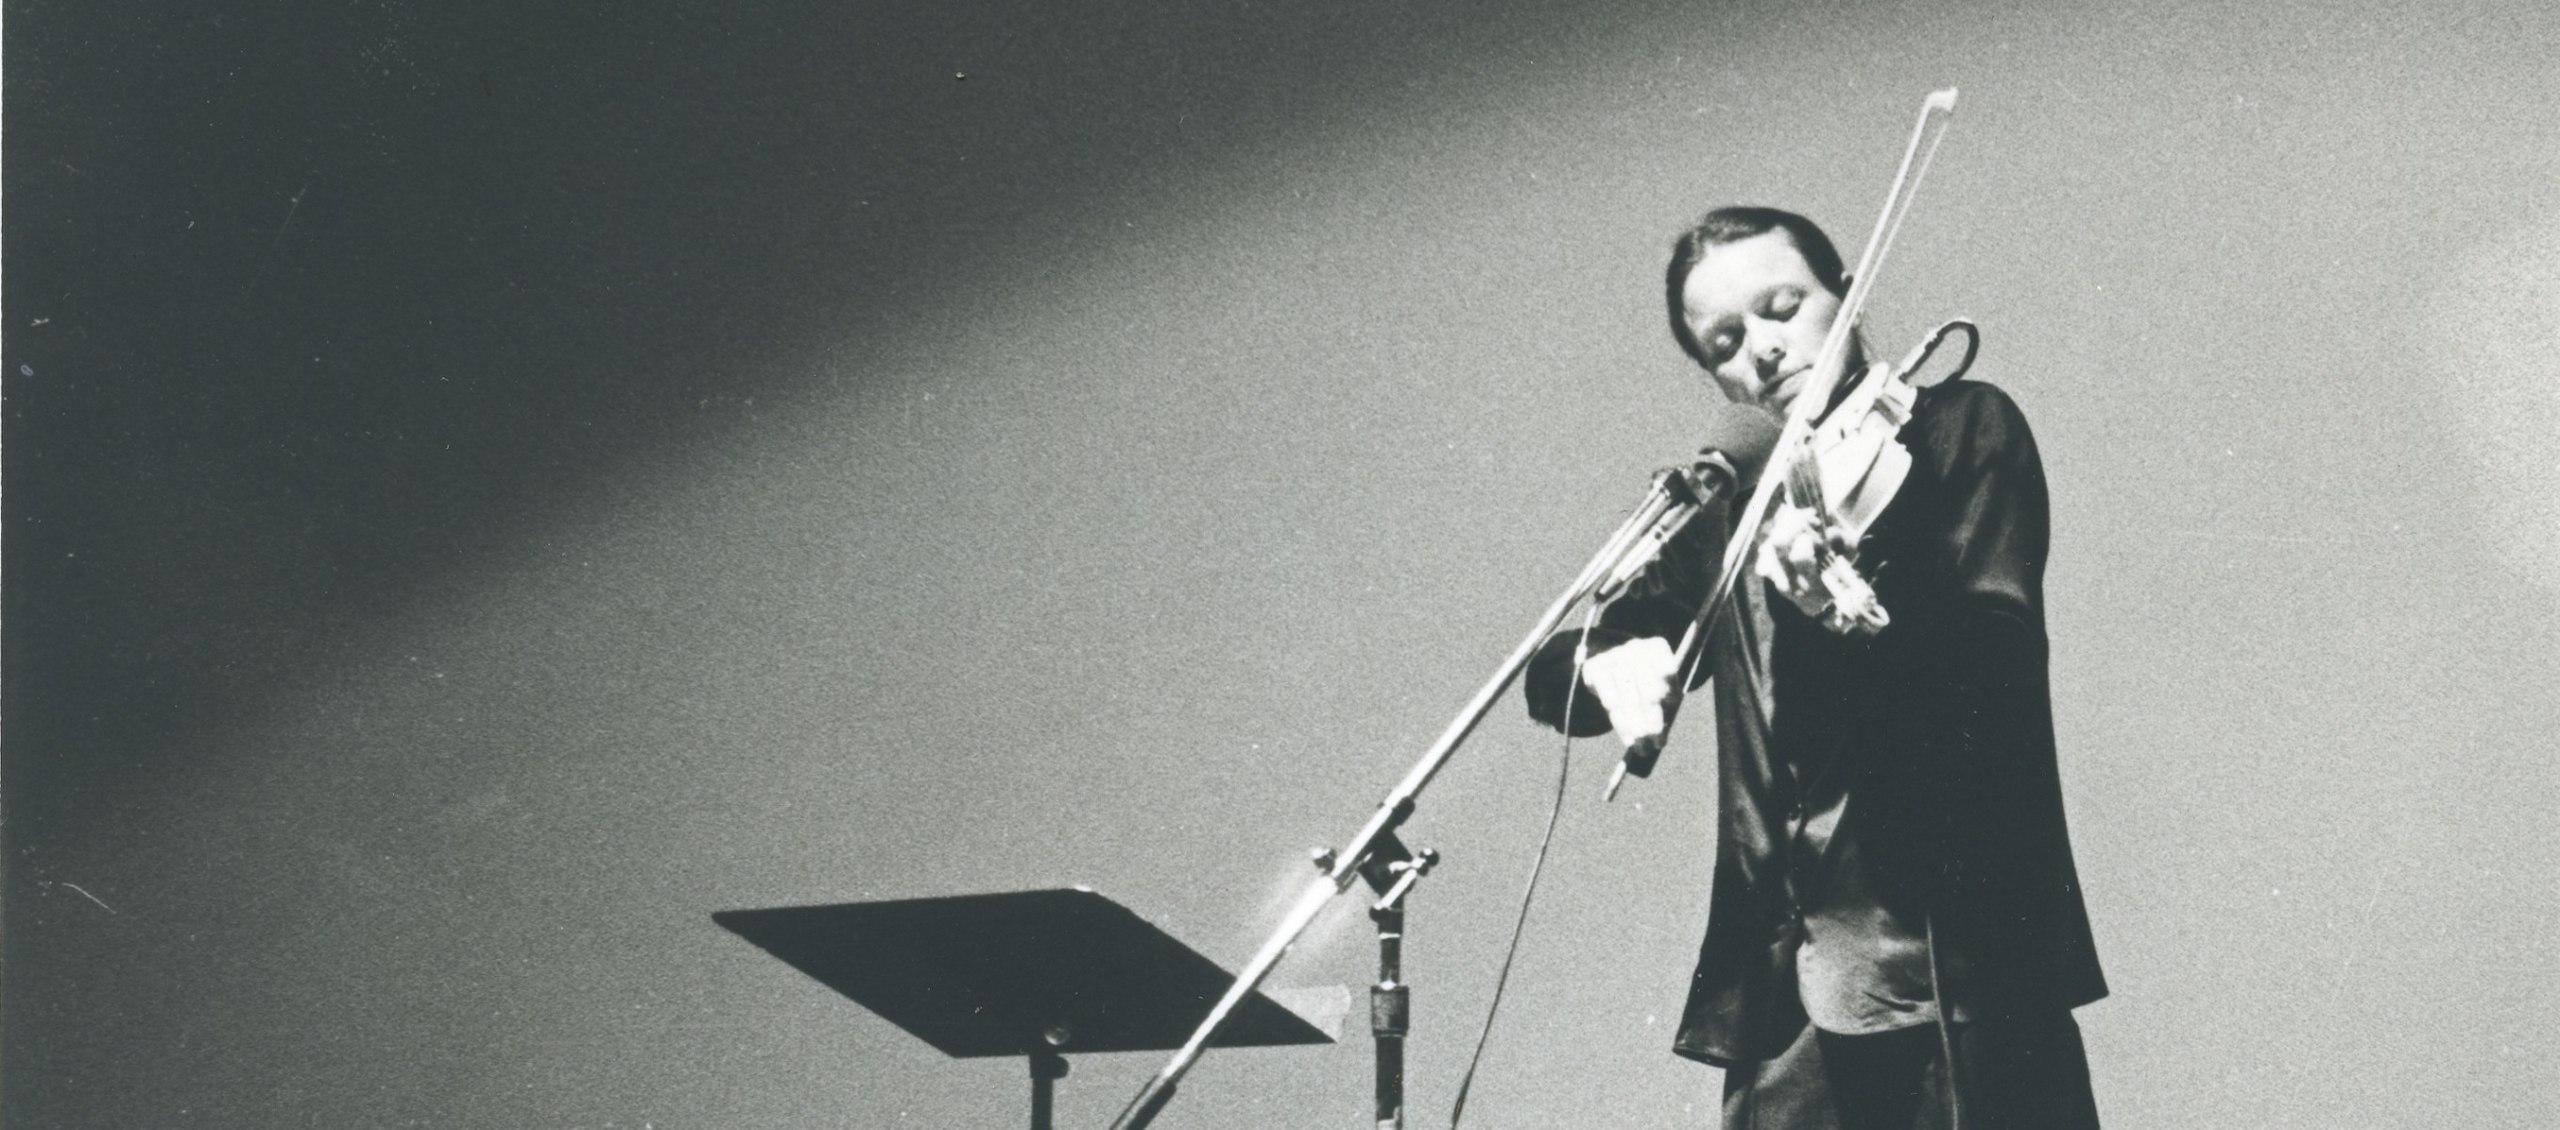 Laurie Anderson Performance at Northwestern University as part of exhibition by Donald Young Gallery, 1979